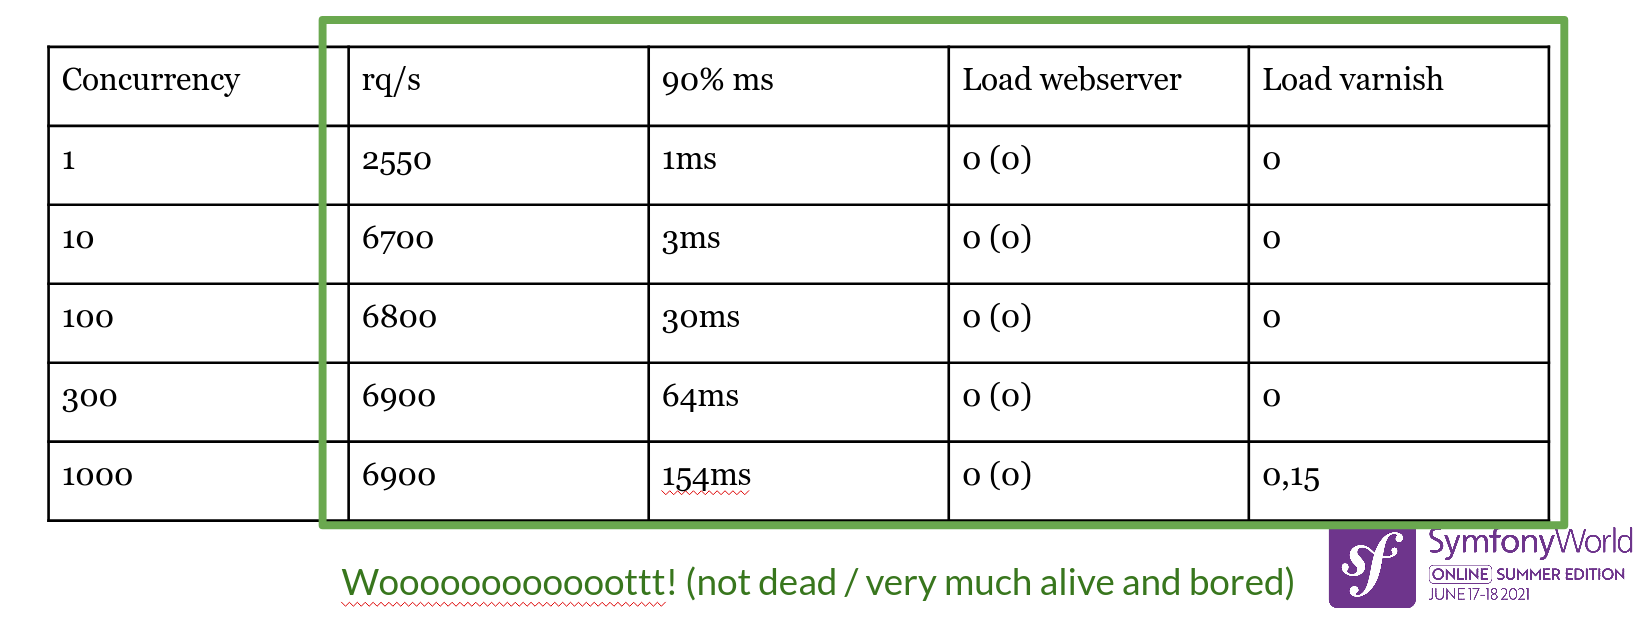 Comparison table of various concurrency in this scenario